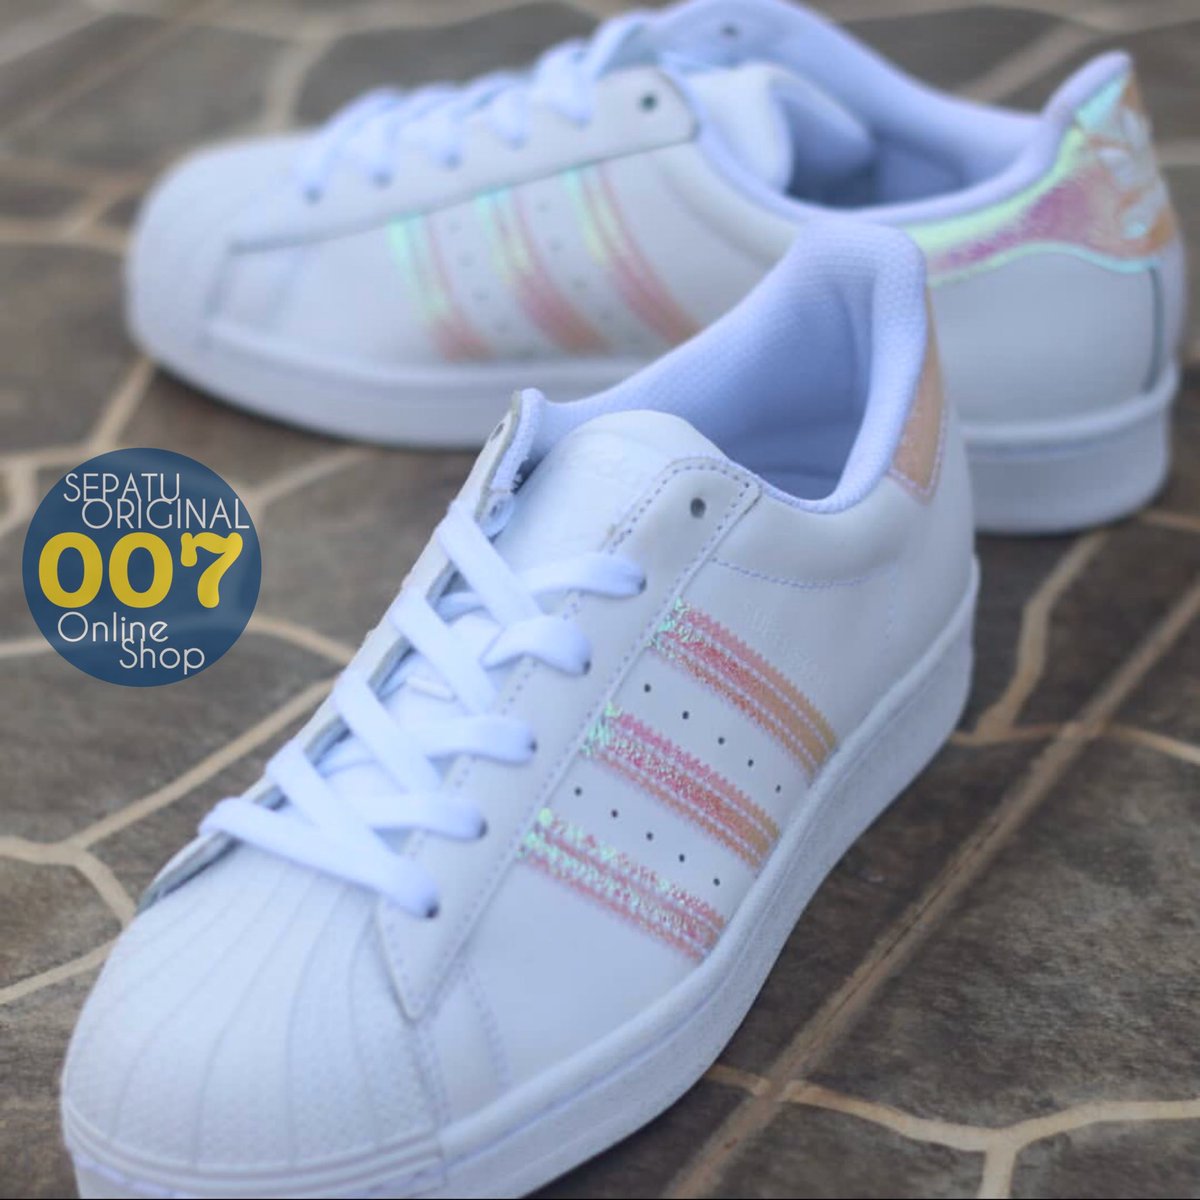 adidas superstar 2 made in indonesia